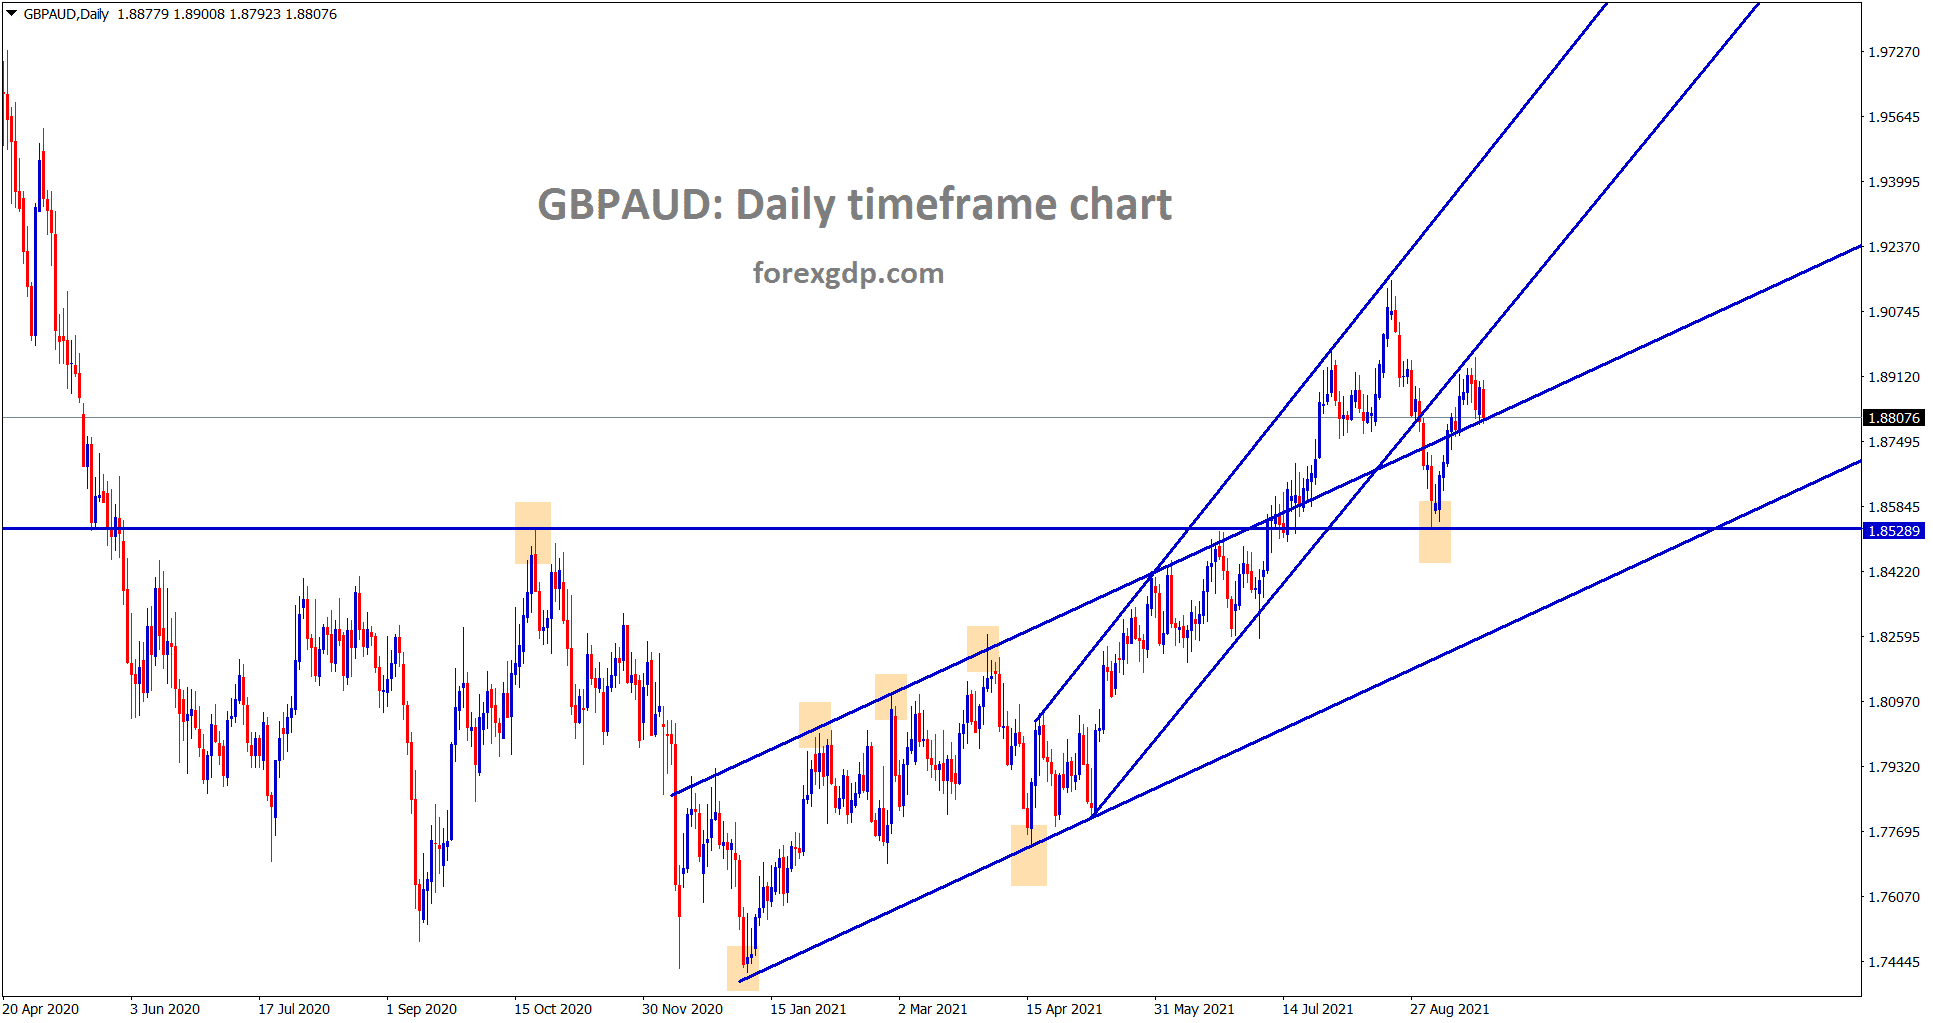 GBPAUD is consolidating at the retest zone of the uptrend lines